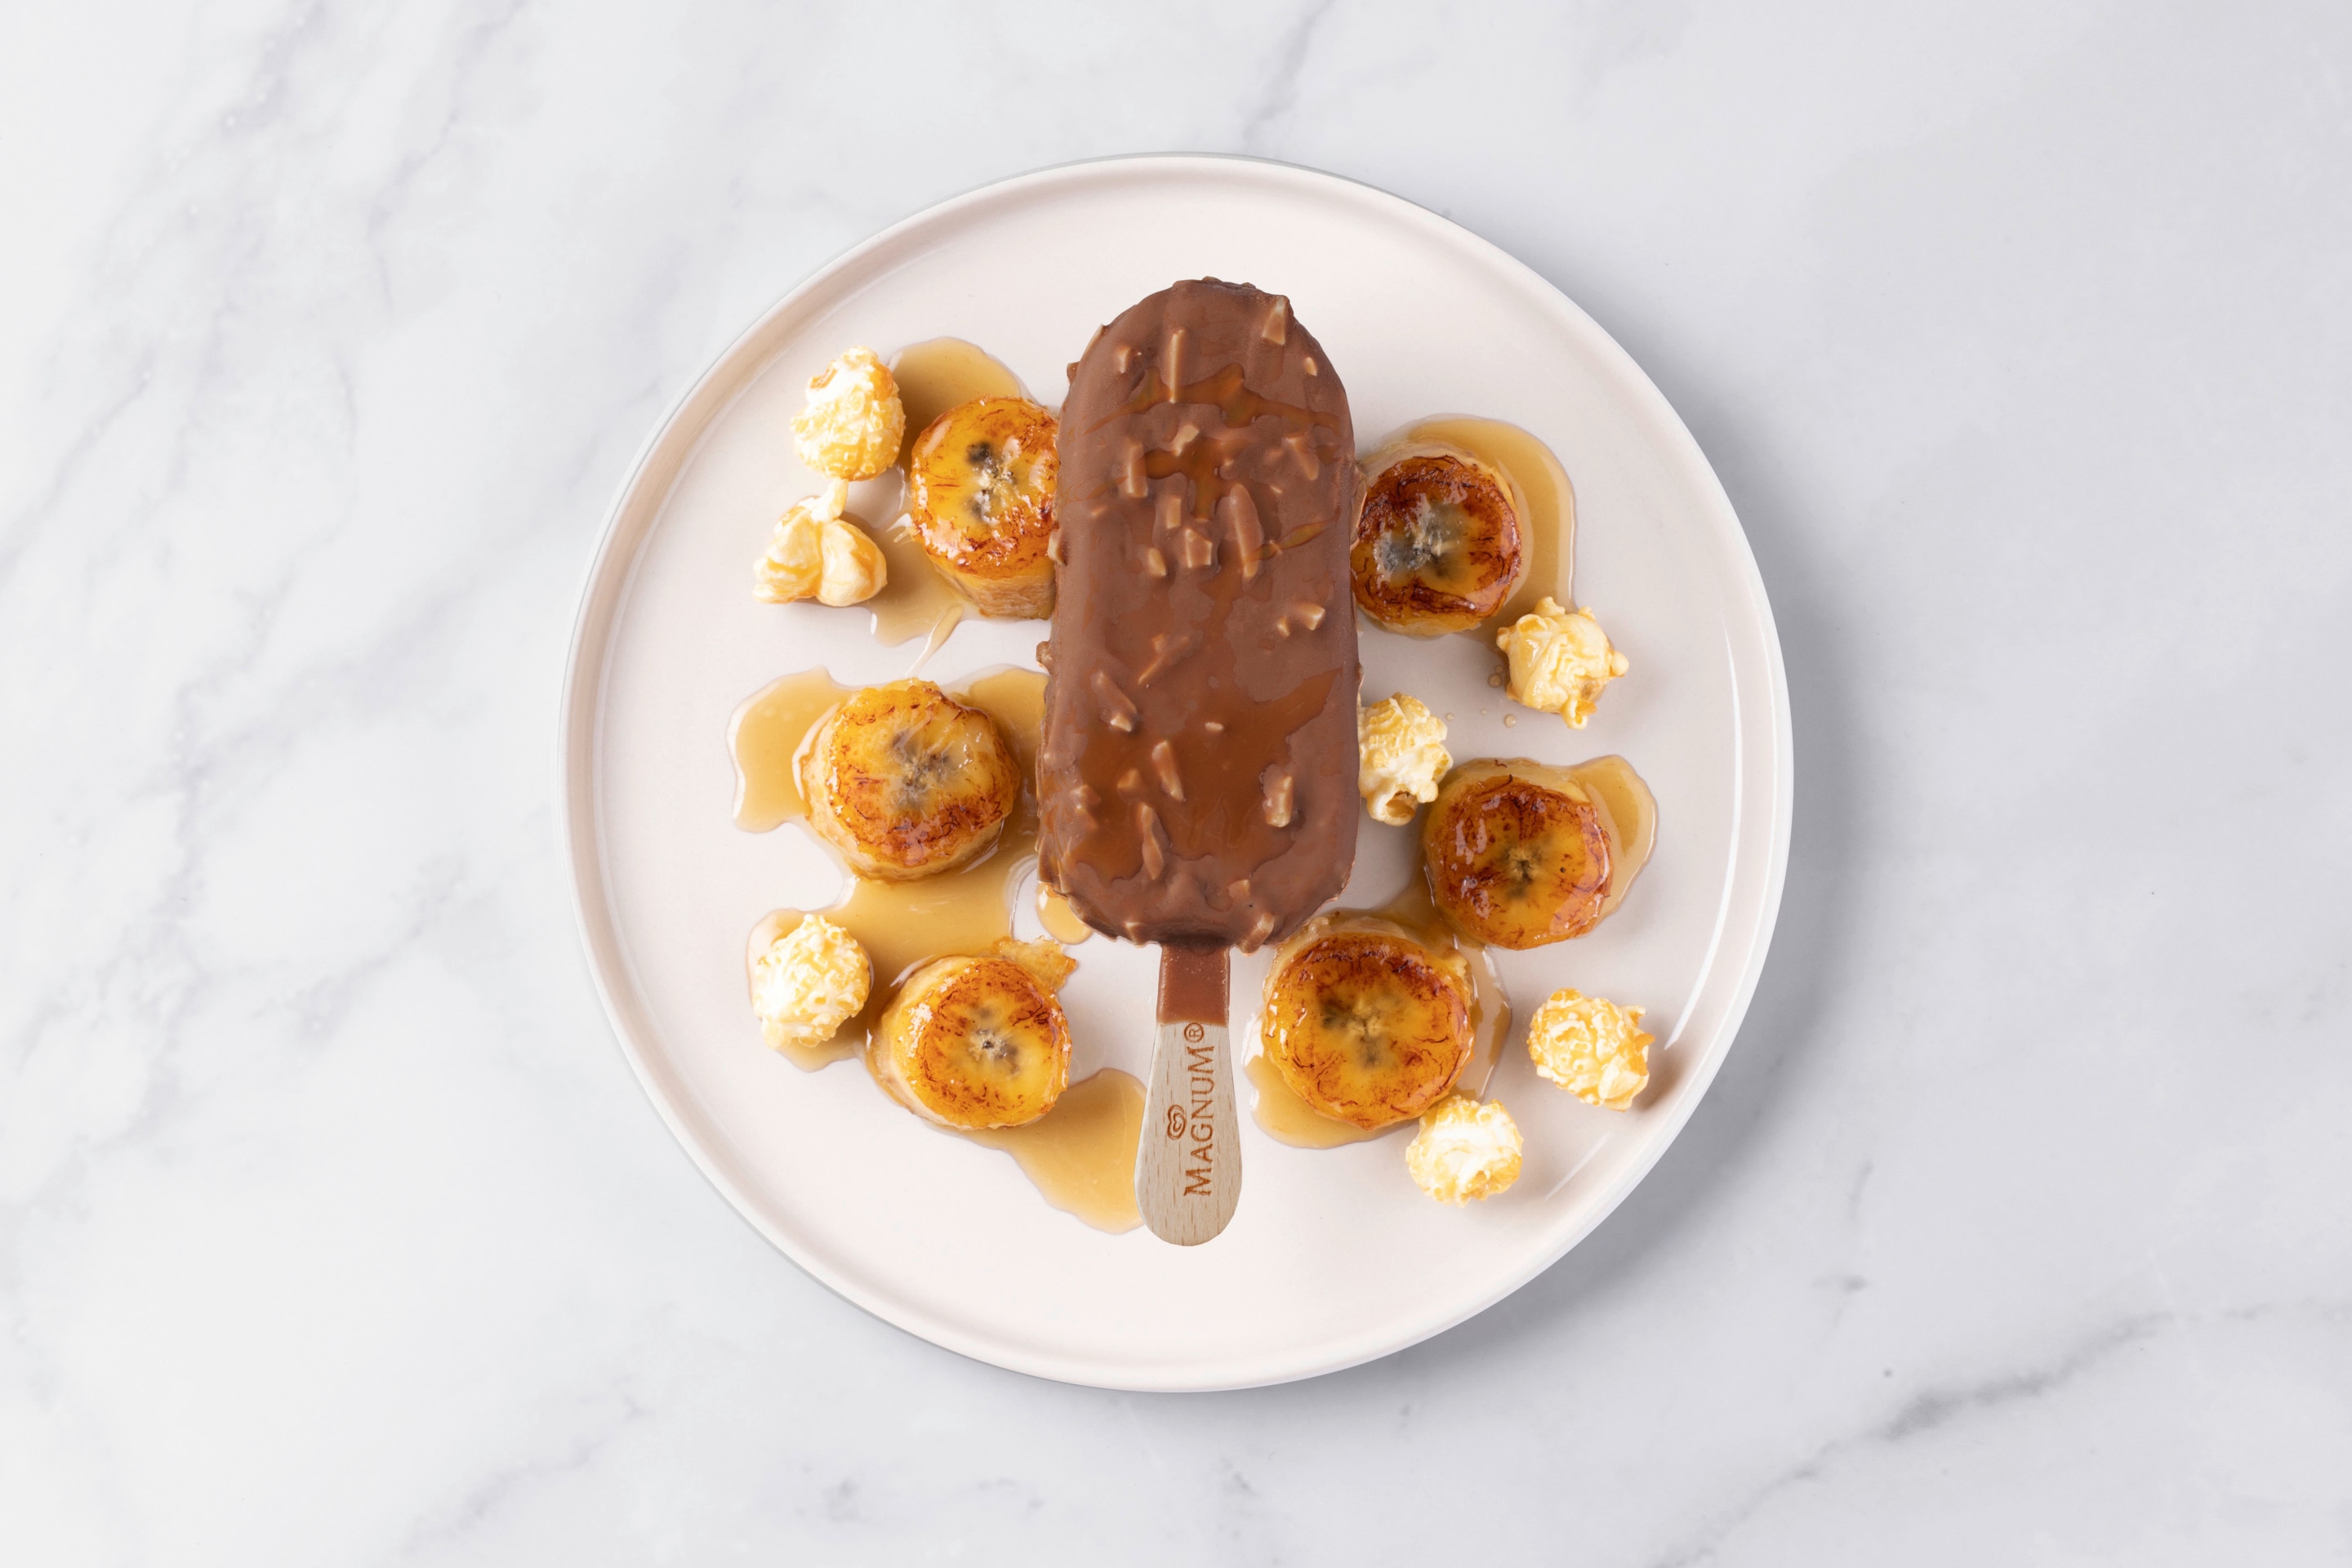 Magnum Movie-night banana and popcorn made with Magnum Almond